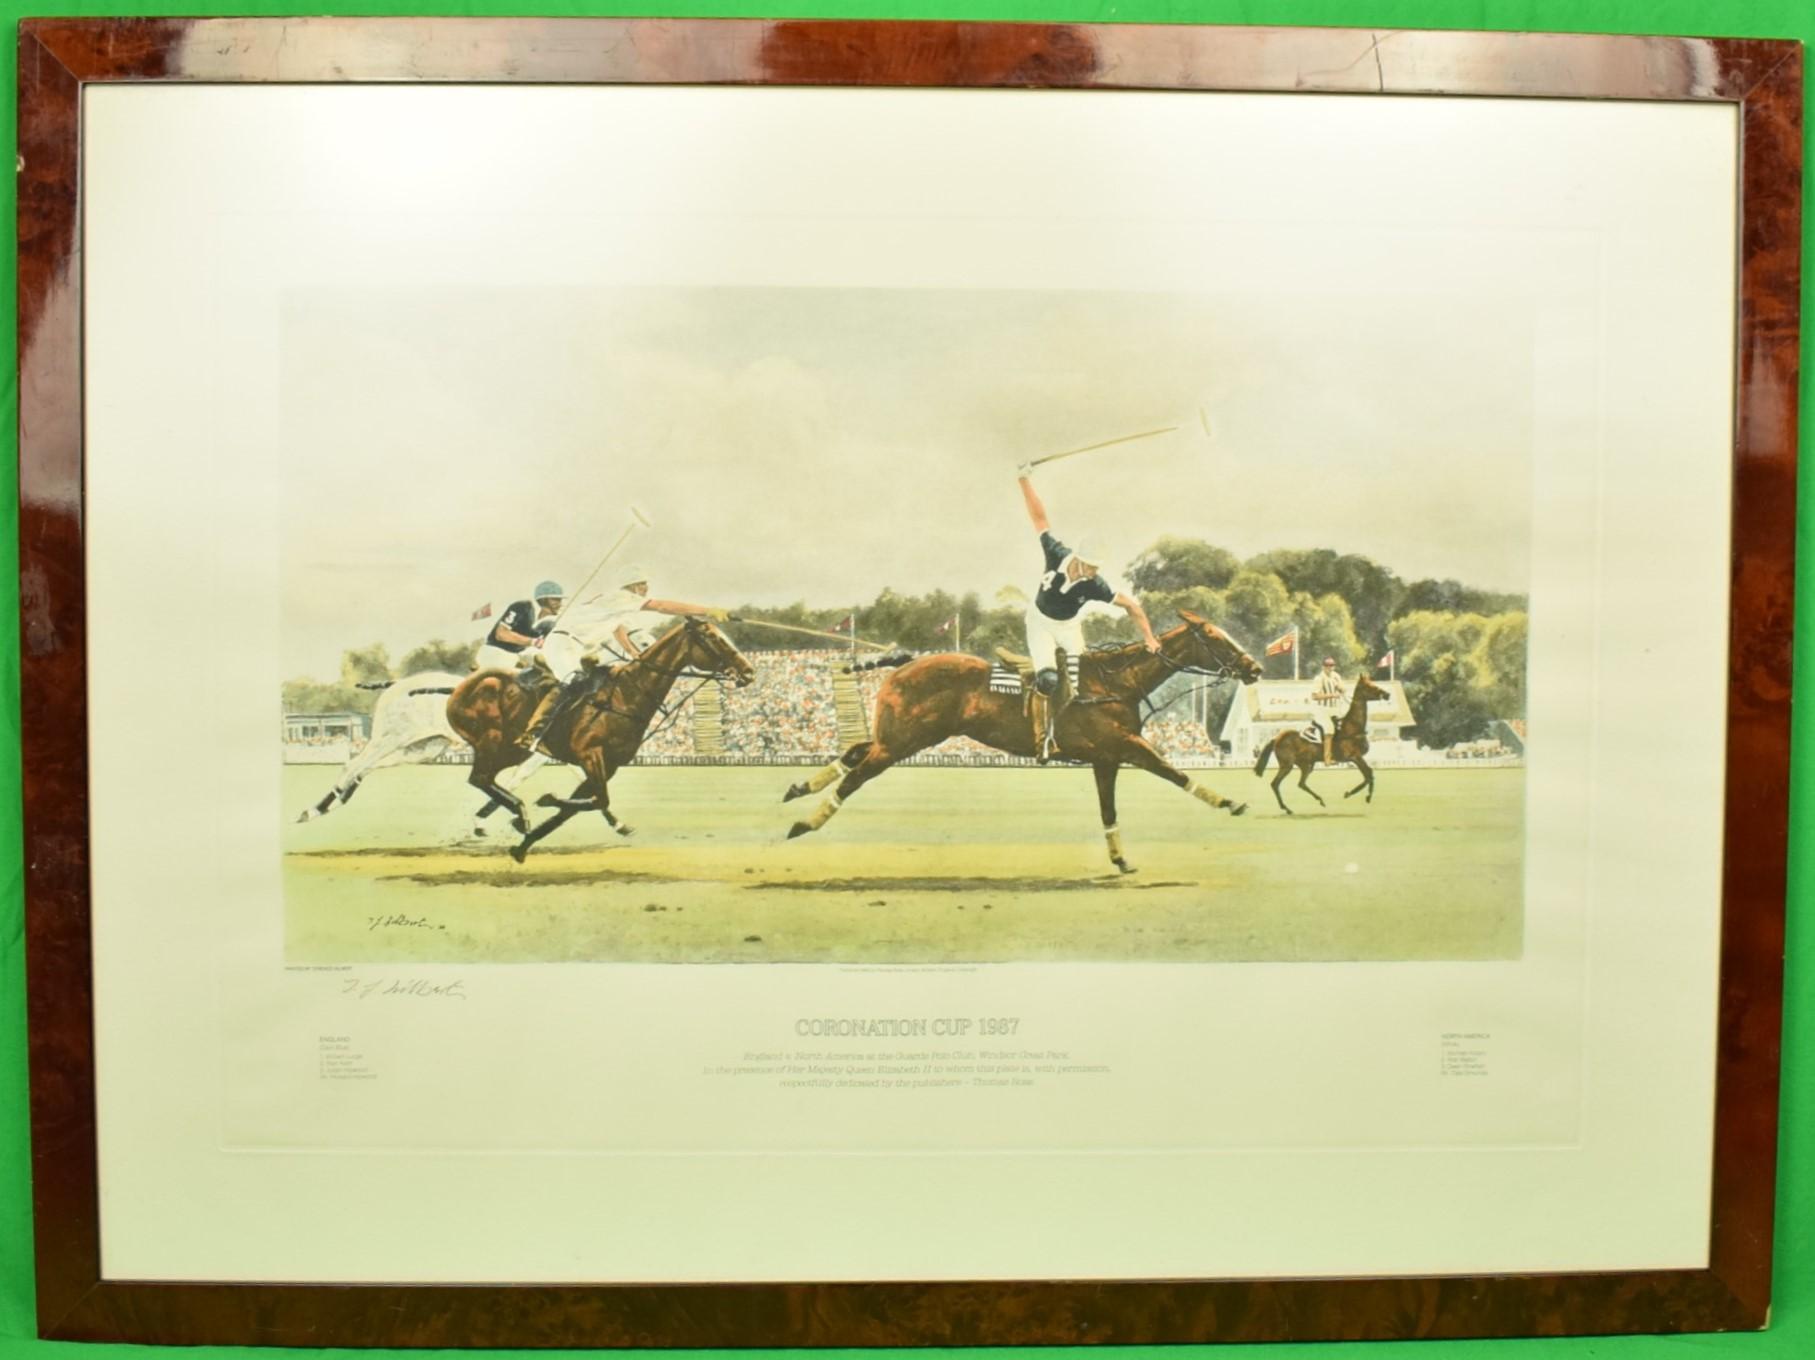 Terence Gilbert Landscape Print - "Coronation Cup" 1987 GILBERT, Painted Terence [Painted by]